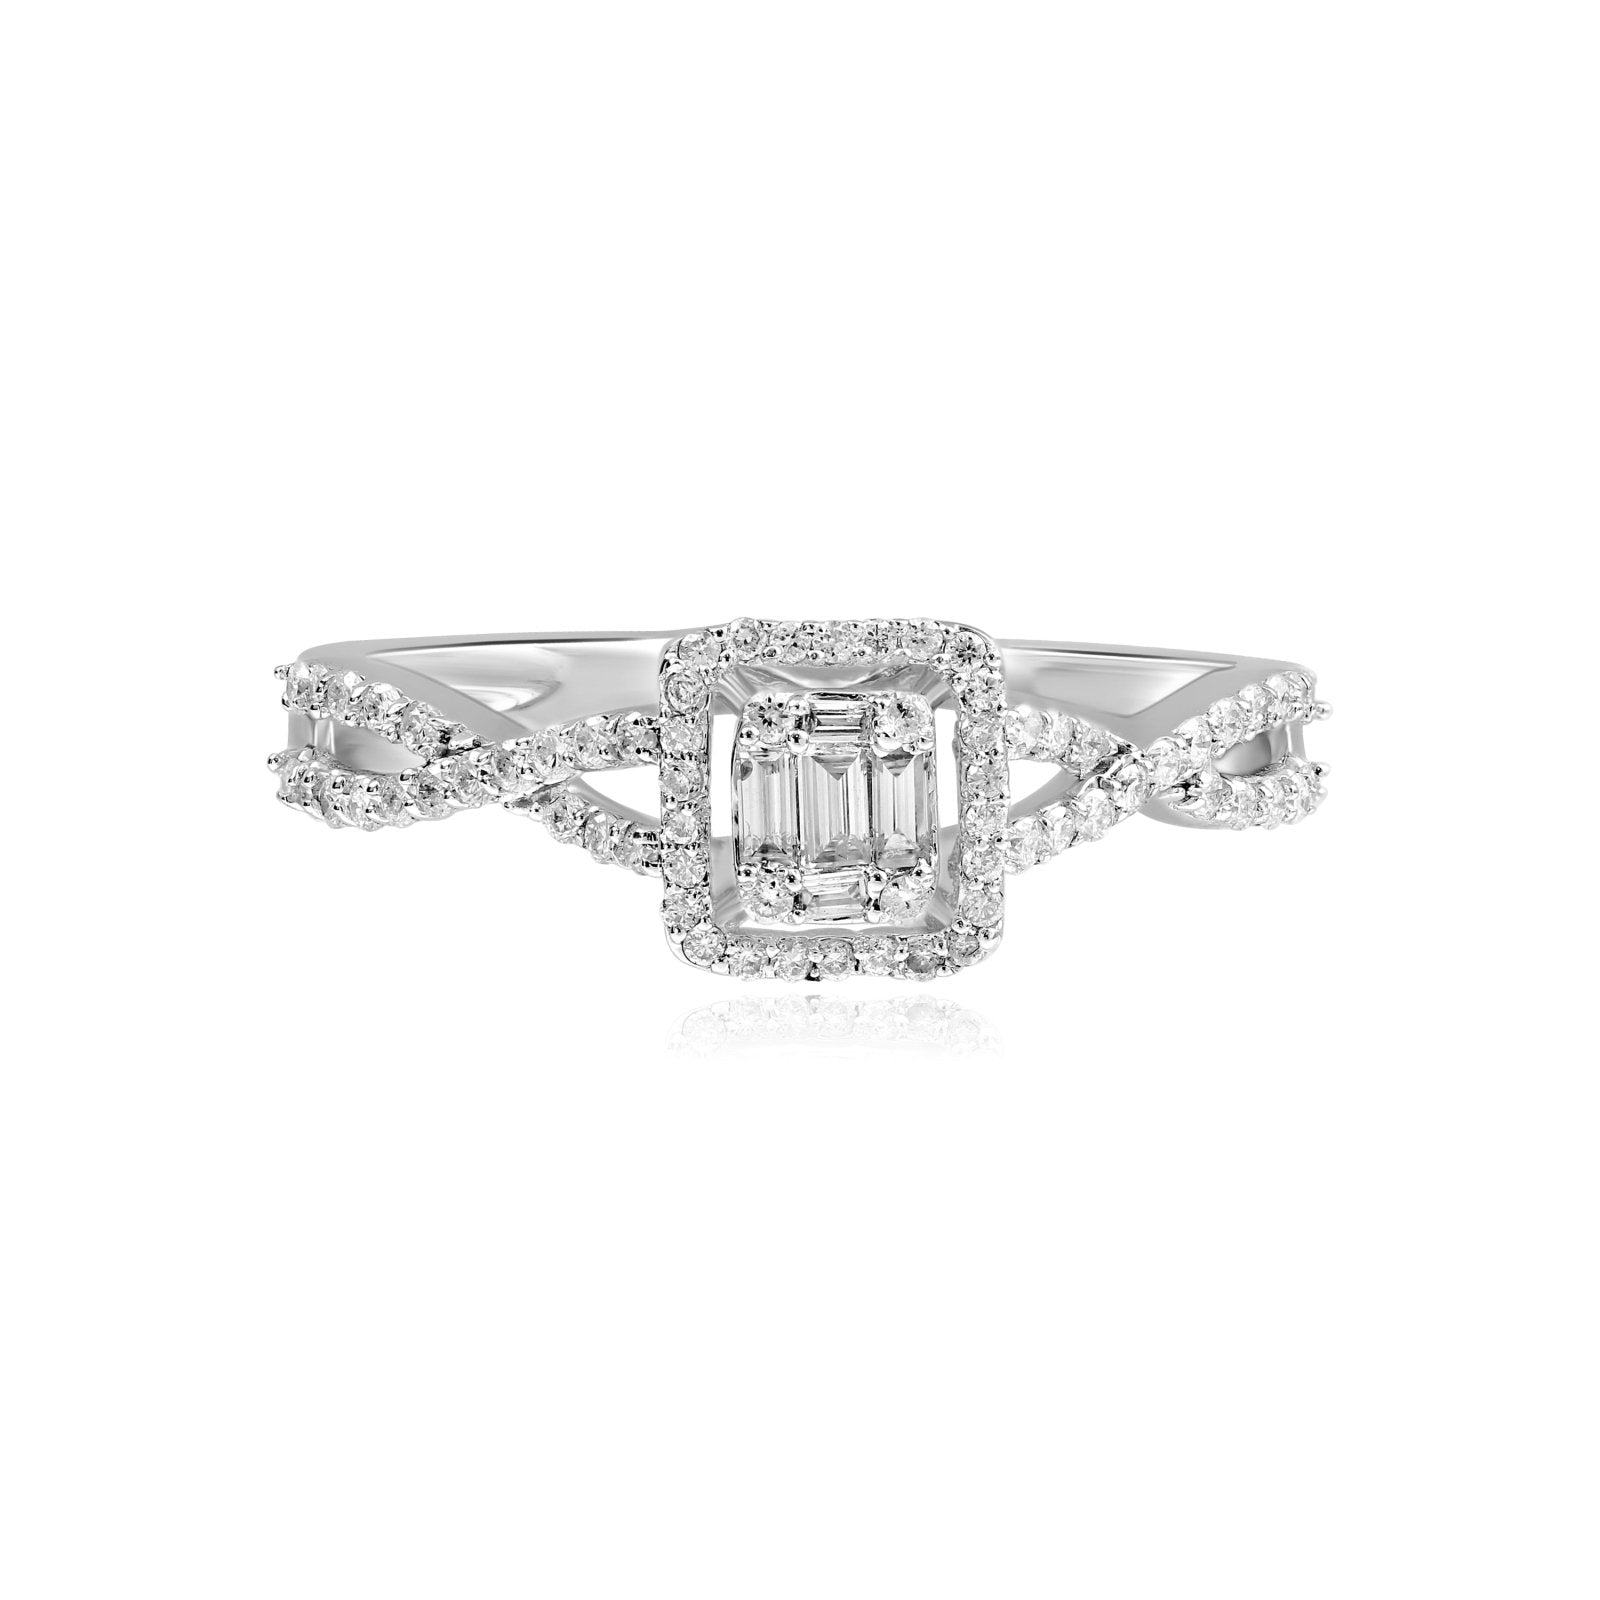 Baguette Halo Diamond with Infinity Shank Band Rings Estella Collection #product_description# 17477 14k Colorless Gemstone Diamond #tag4# #tag5# #tag6# #tag7# #tag8# #tag9# #tag10# 6